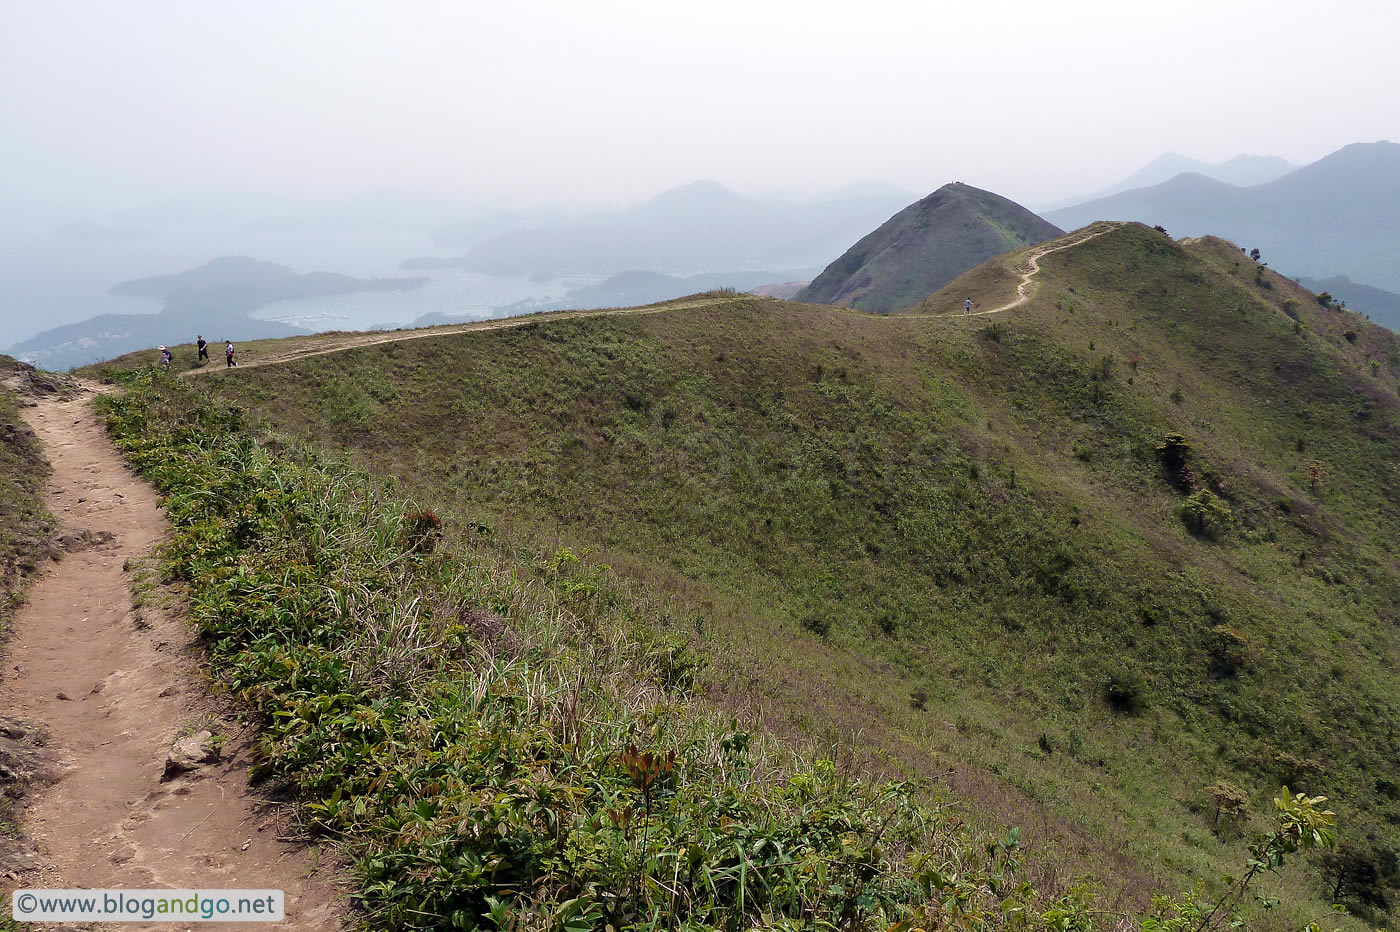 Maclehose Trail 4 - The spine of the mountain